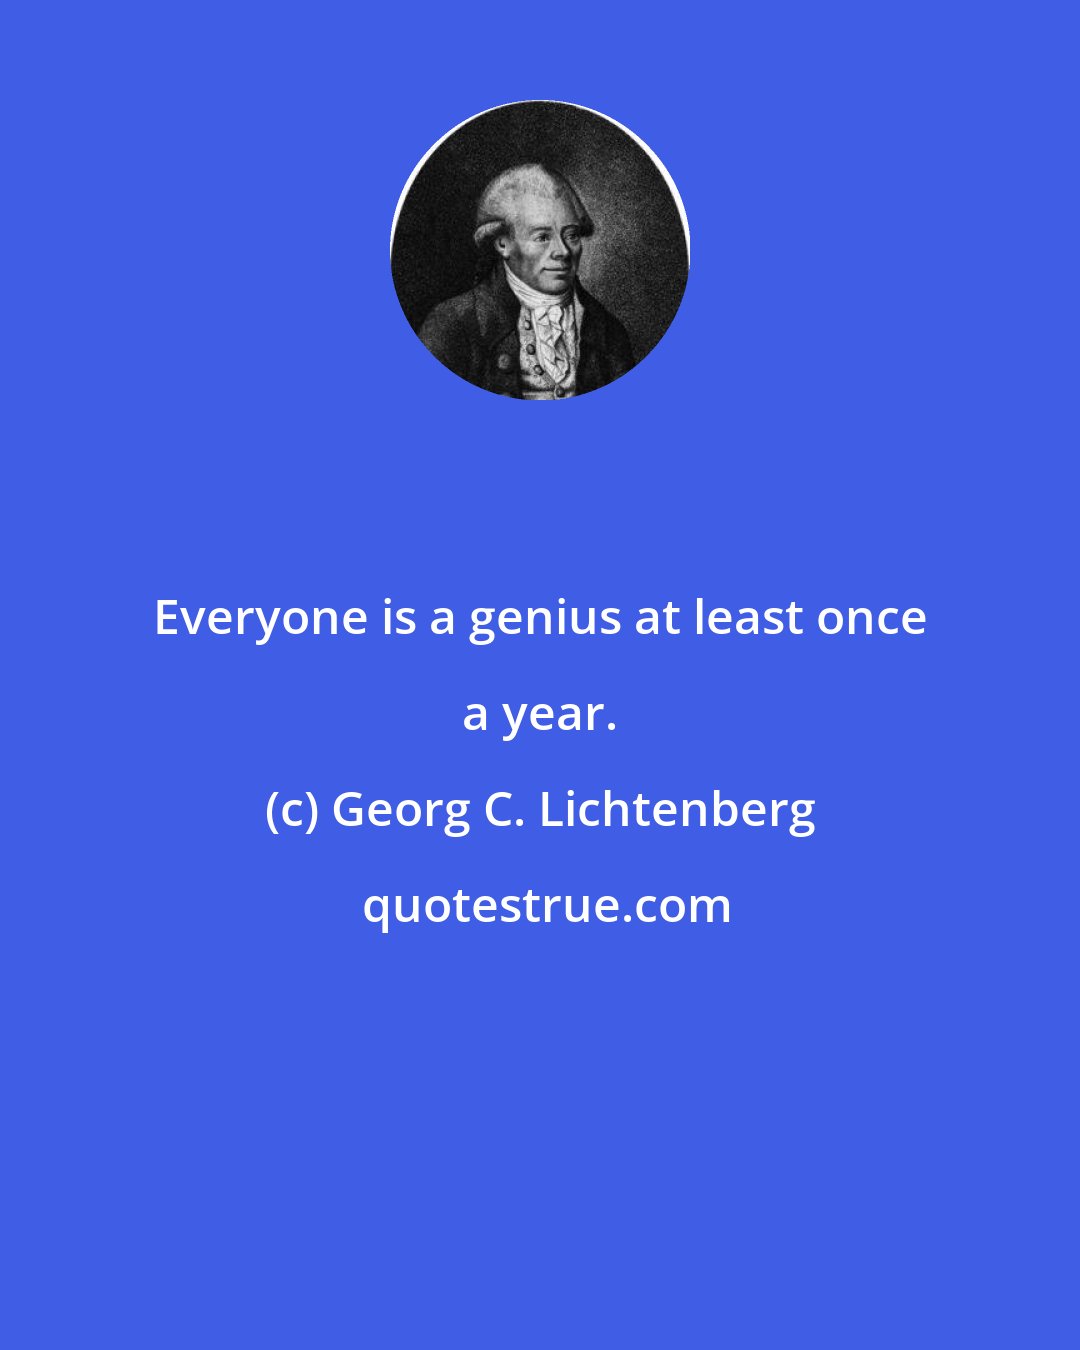 Georg C. Lichtenberg: Everyone is a genius at least once a year.